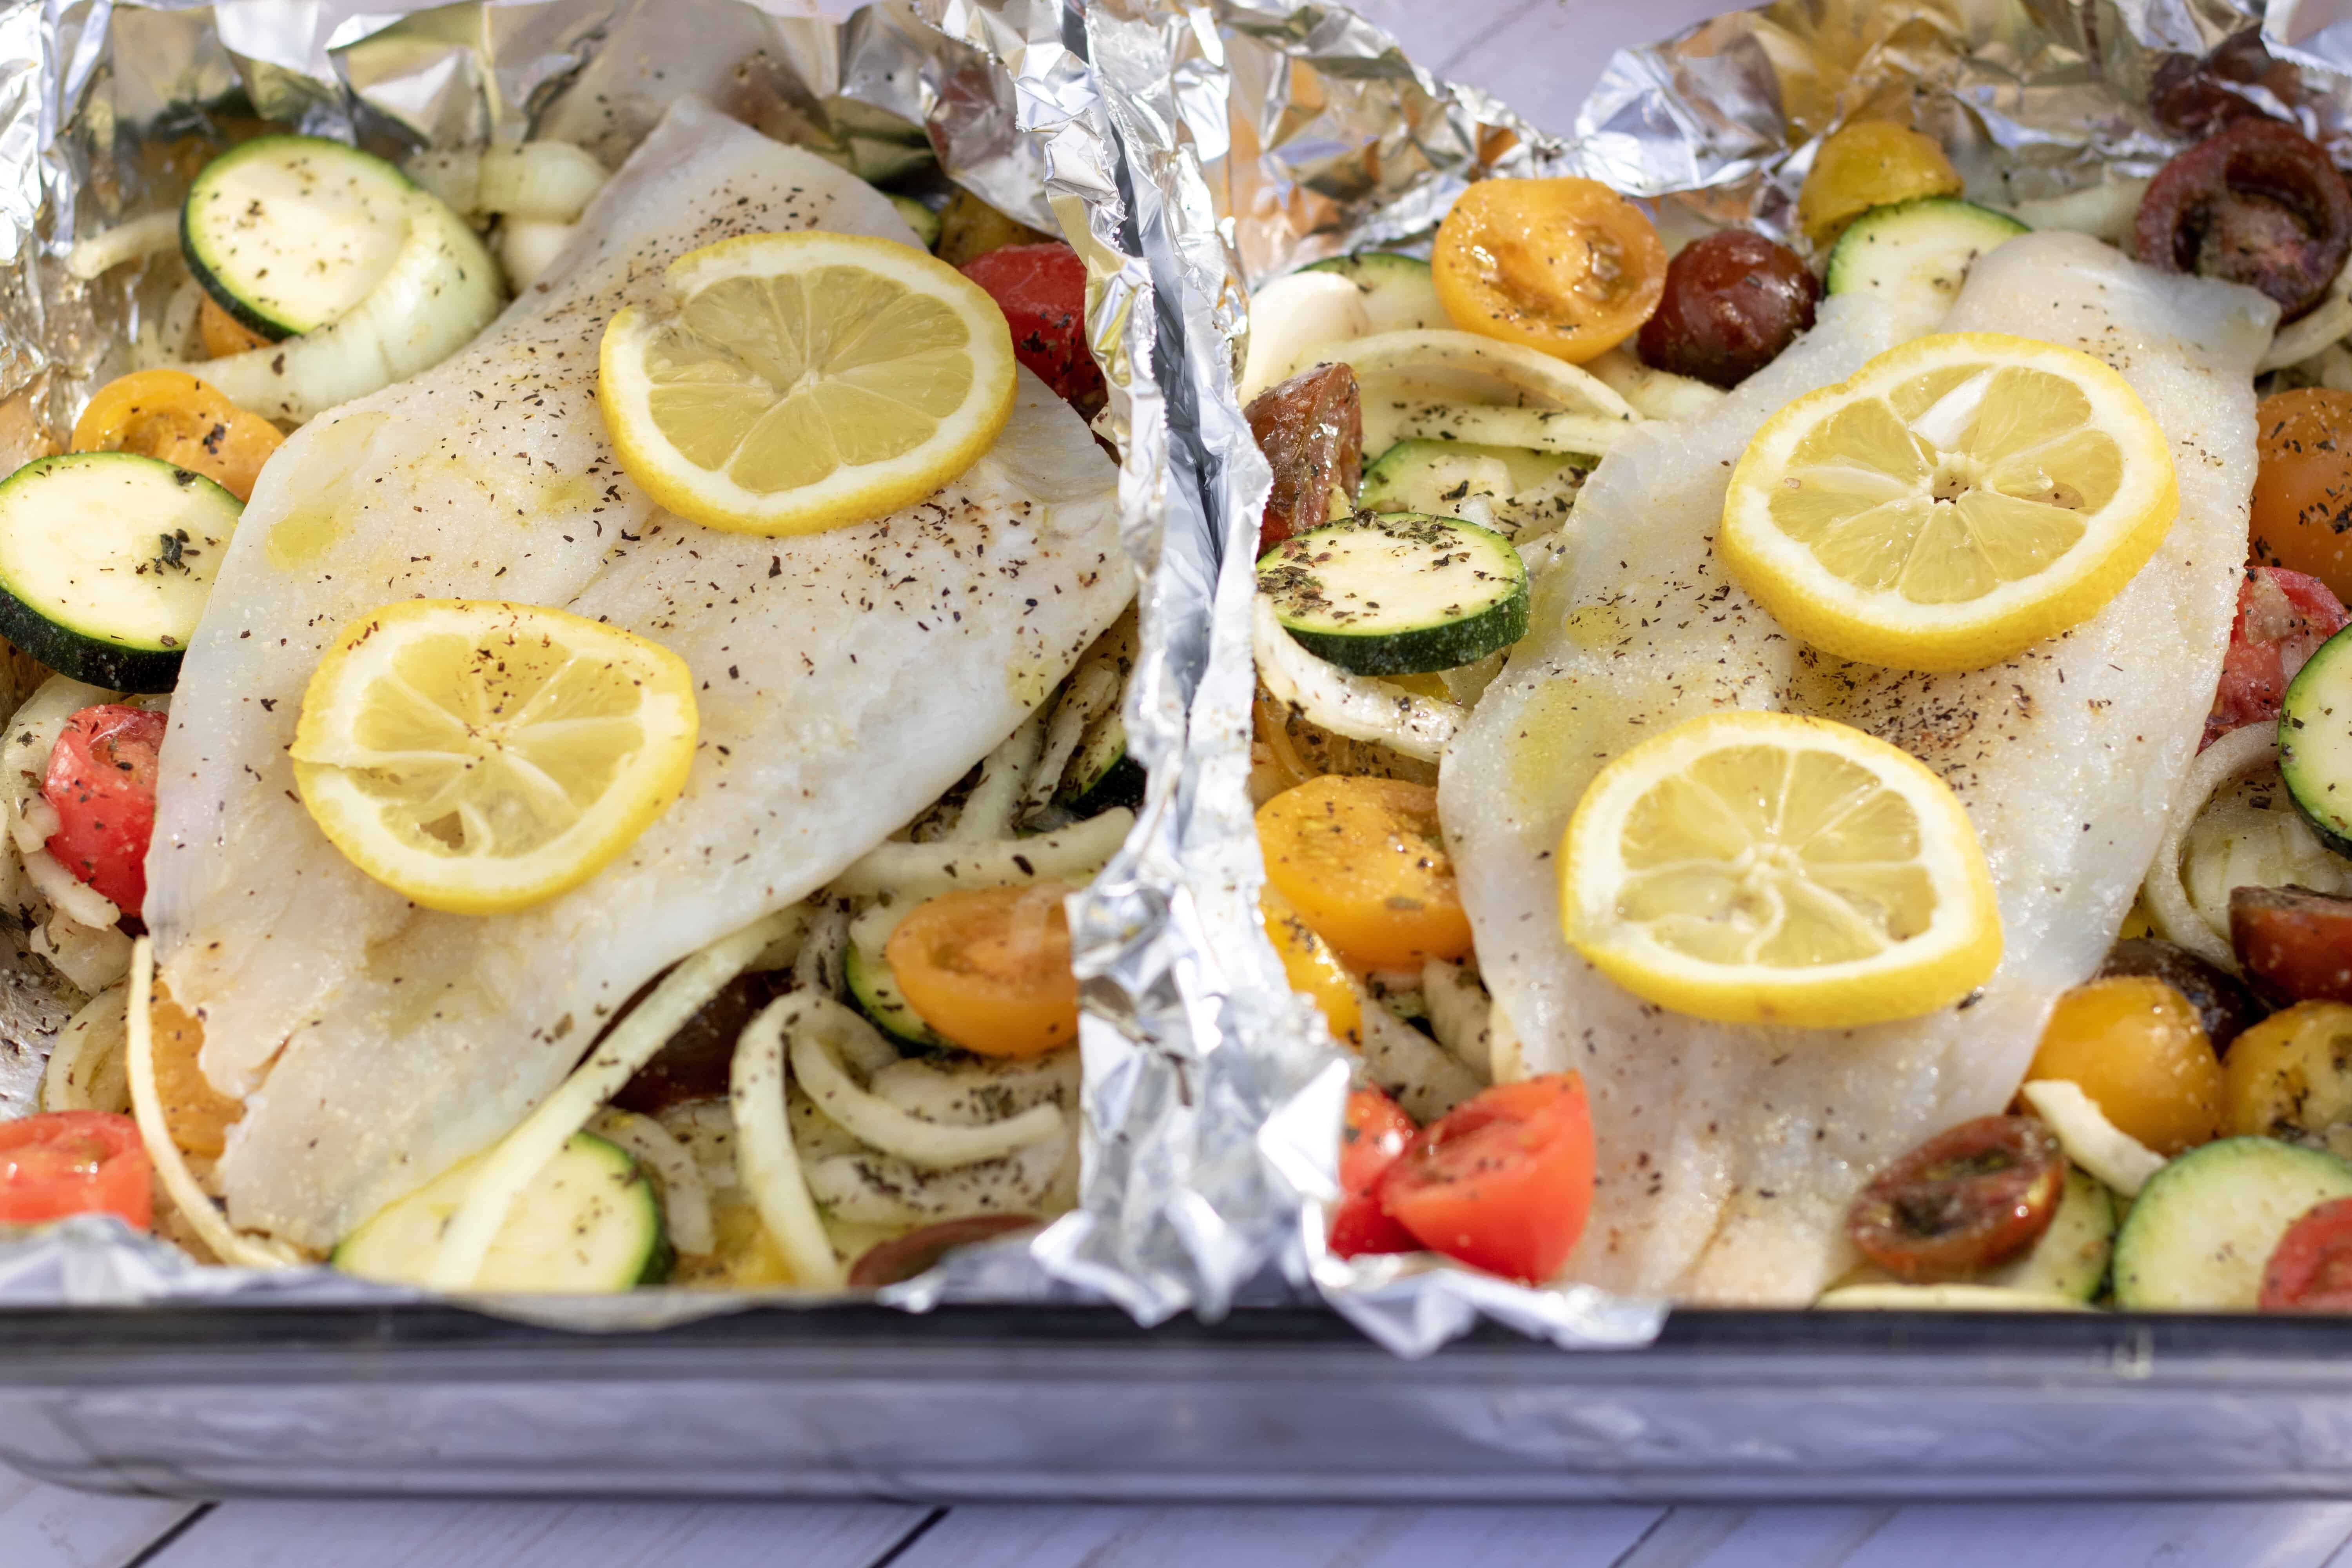 A glass 13x9” baking dish with two foil packets that are filled with vegetables and topped with white fish. It’s to be baked in the oven for an easy family dinner that’s healthy and quick to make. It’s got vibrant colorful cherry tomatoes, sliced zucchini and onions. You can see the fish is drizzled with olive oil and sprinkled with salt and pepper.